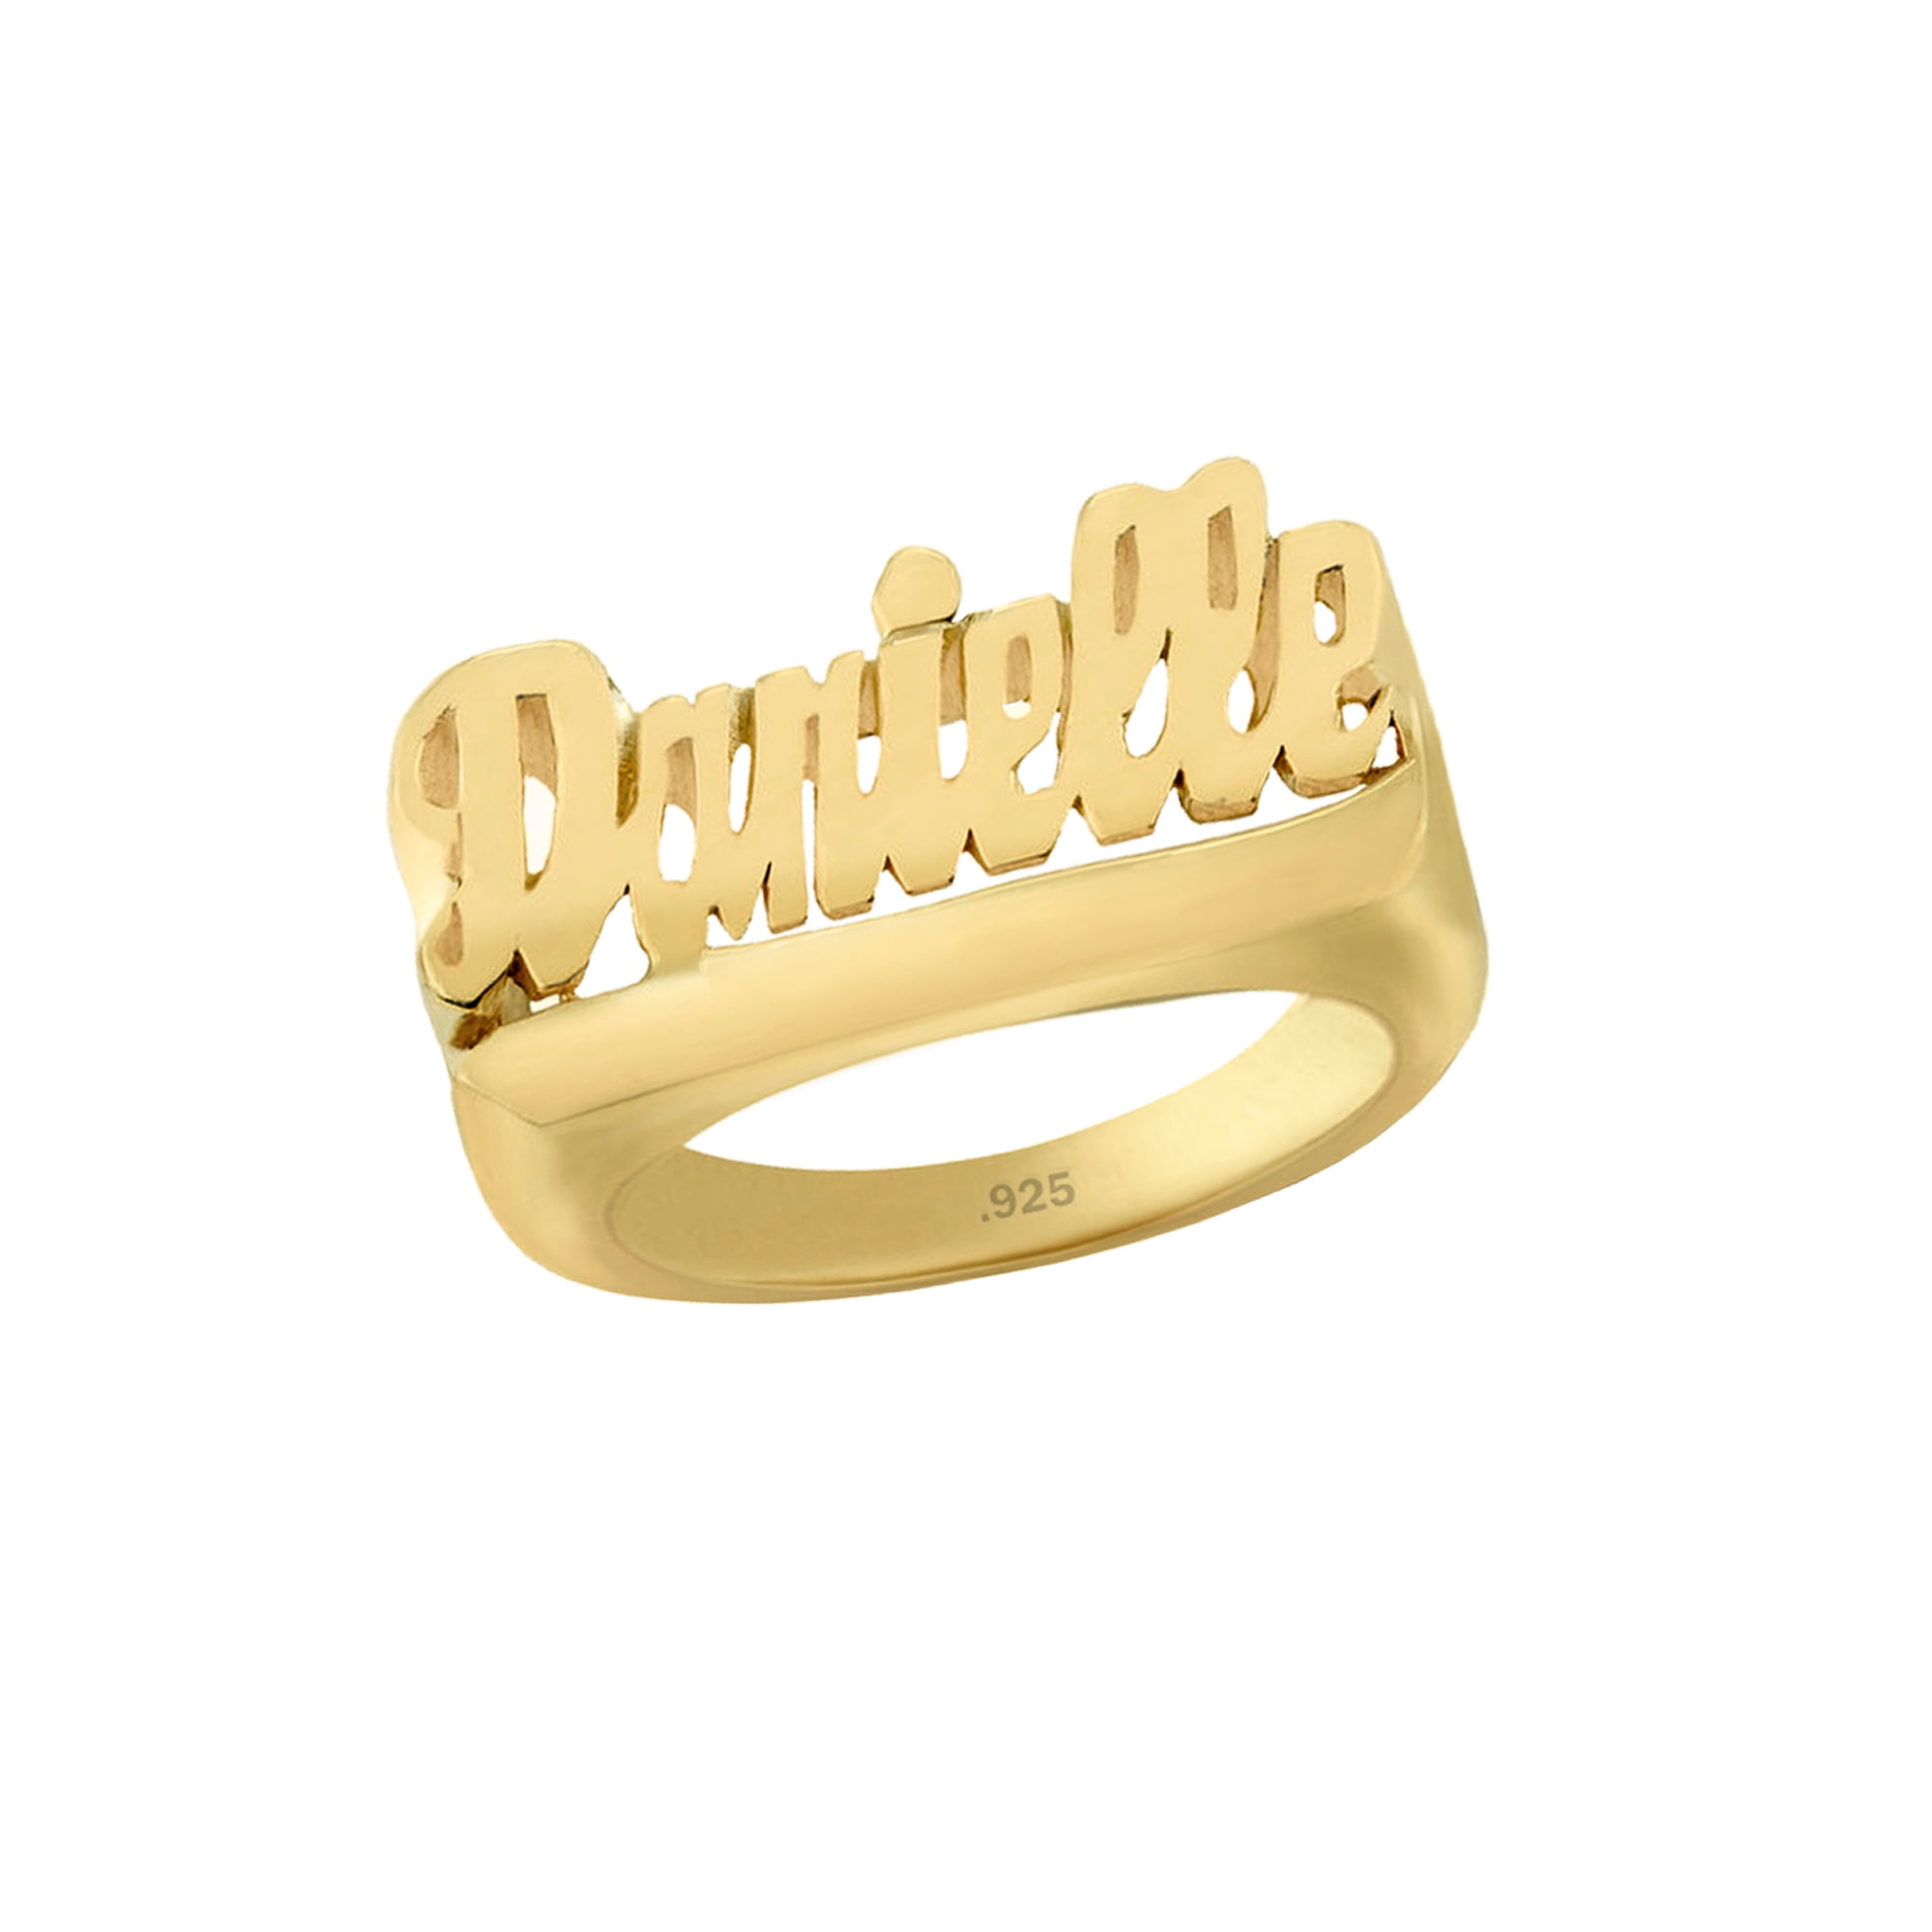 1 Gram Gold Plated Maa Superior Quality Gorgeous Design Ring For Men -  Style B319 at Rs 2640.00 | Rajkot| ID: 2851111649262